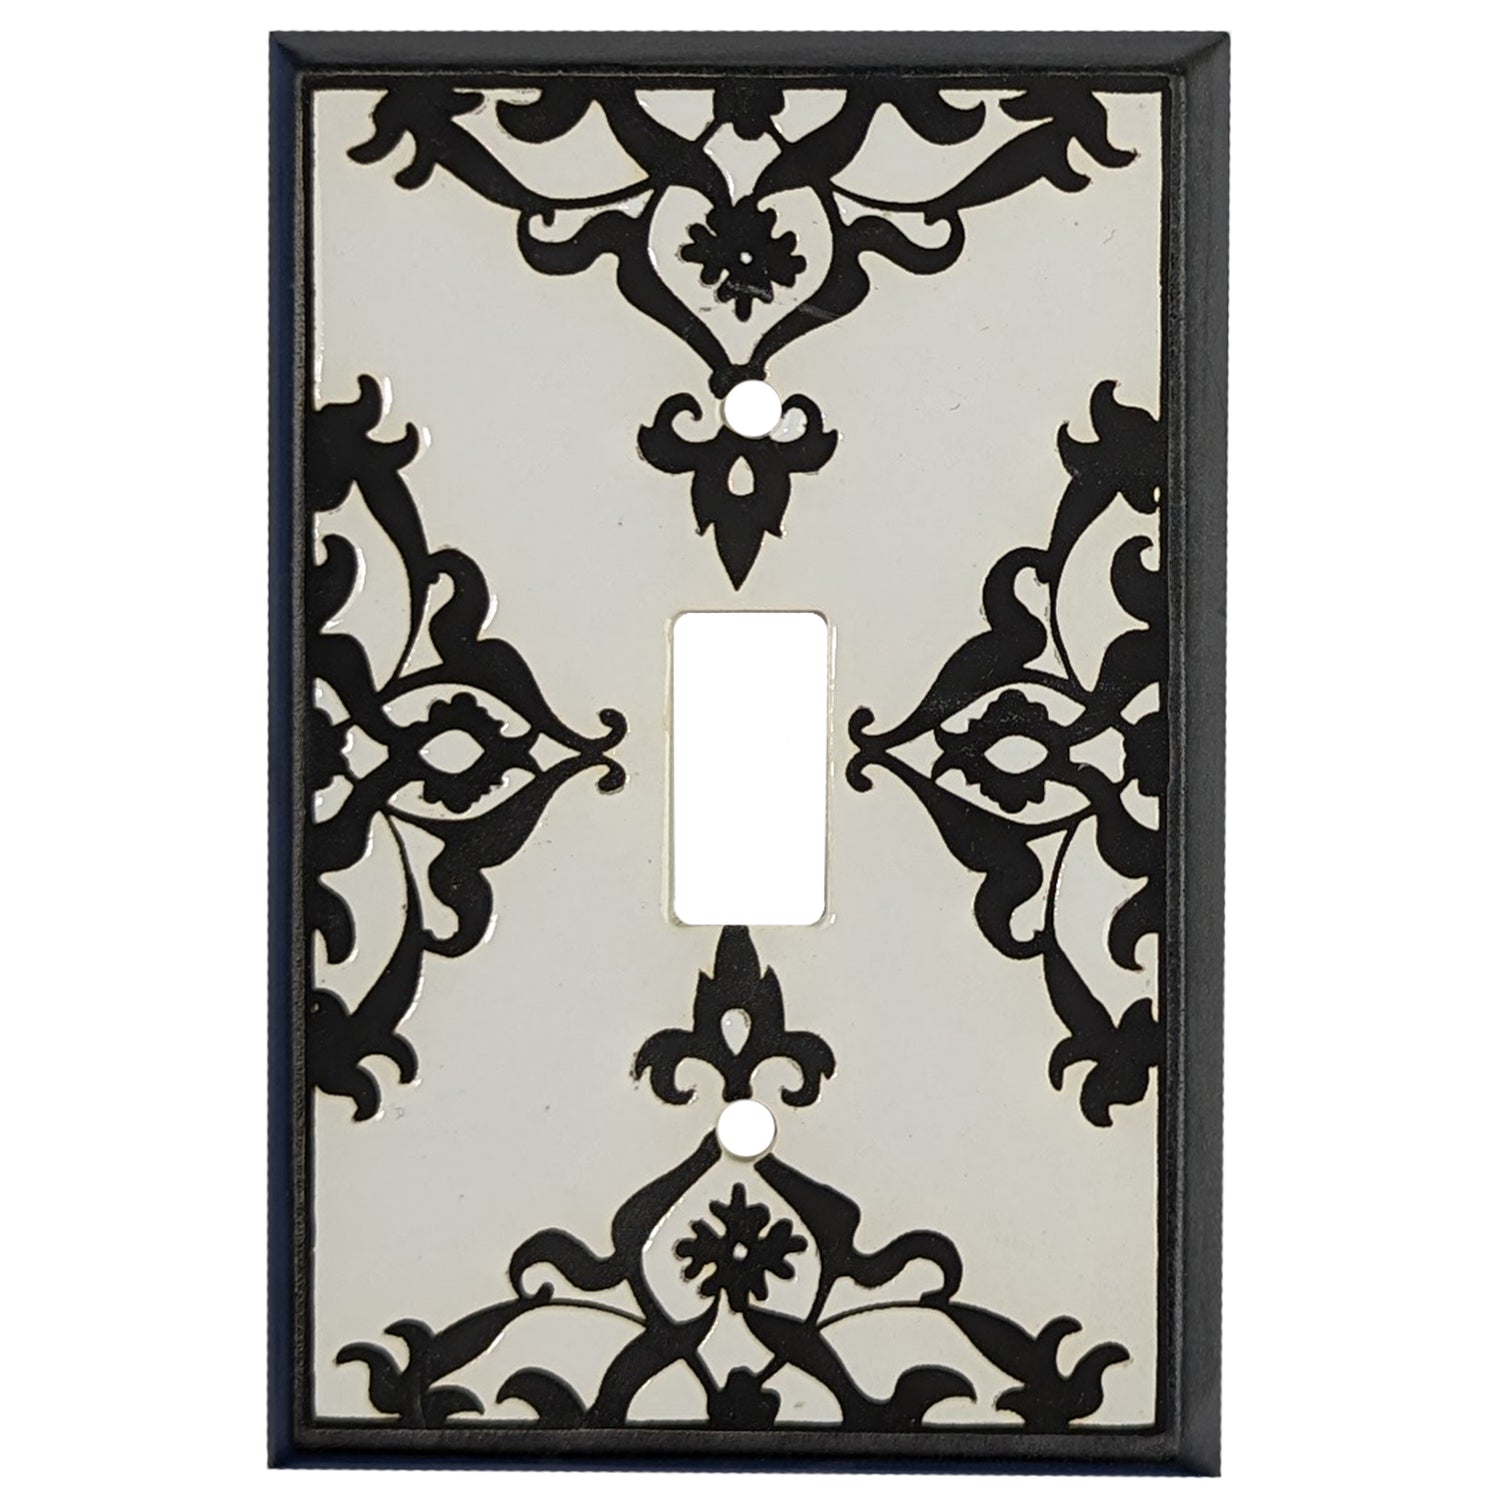 Lace - Black and White Cover Plates Cover Plates